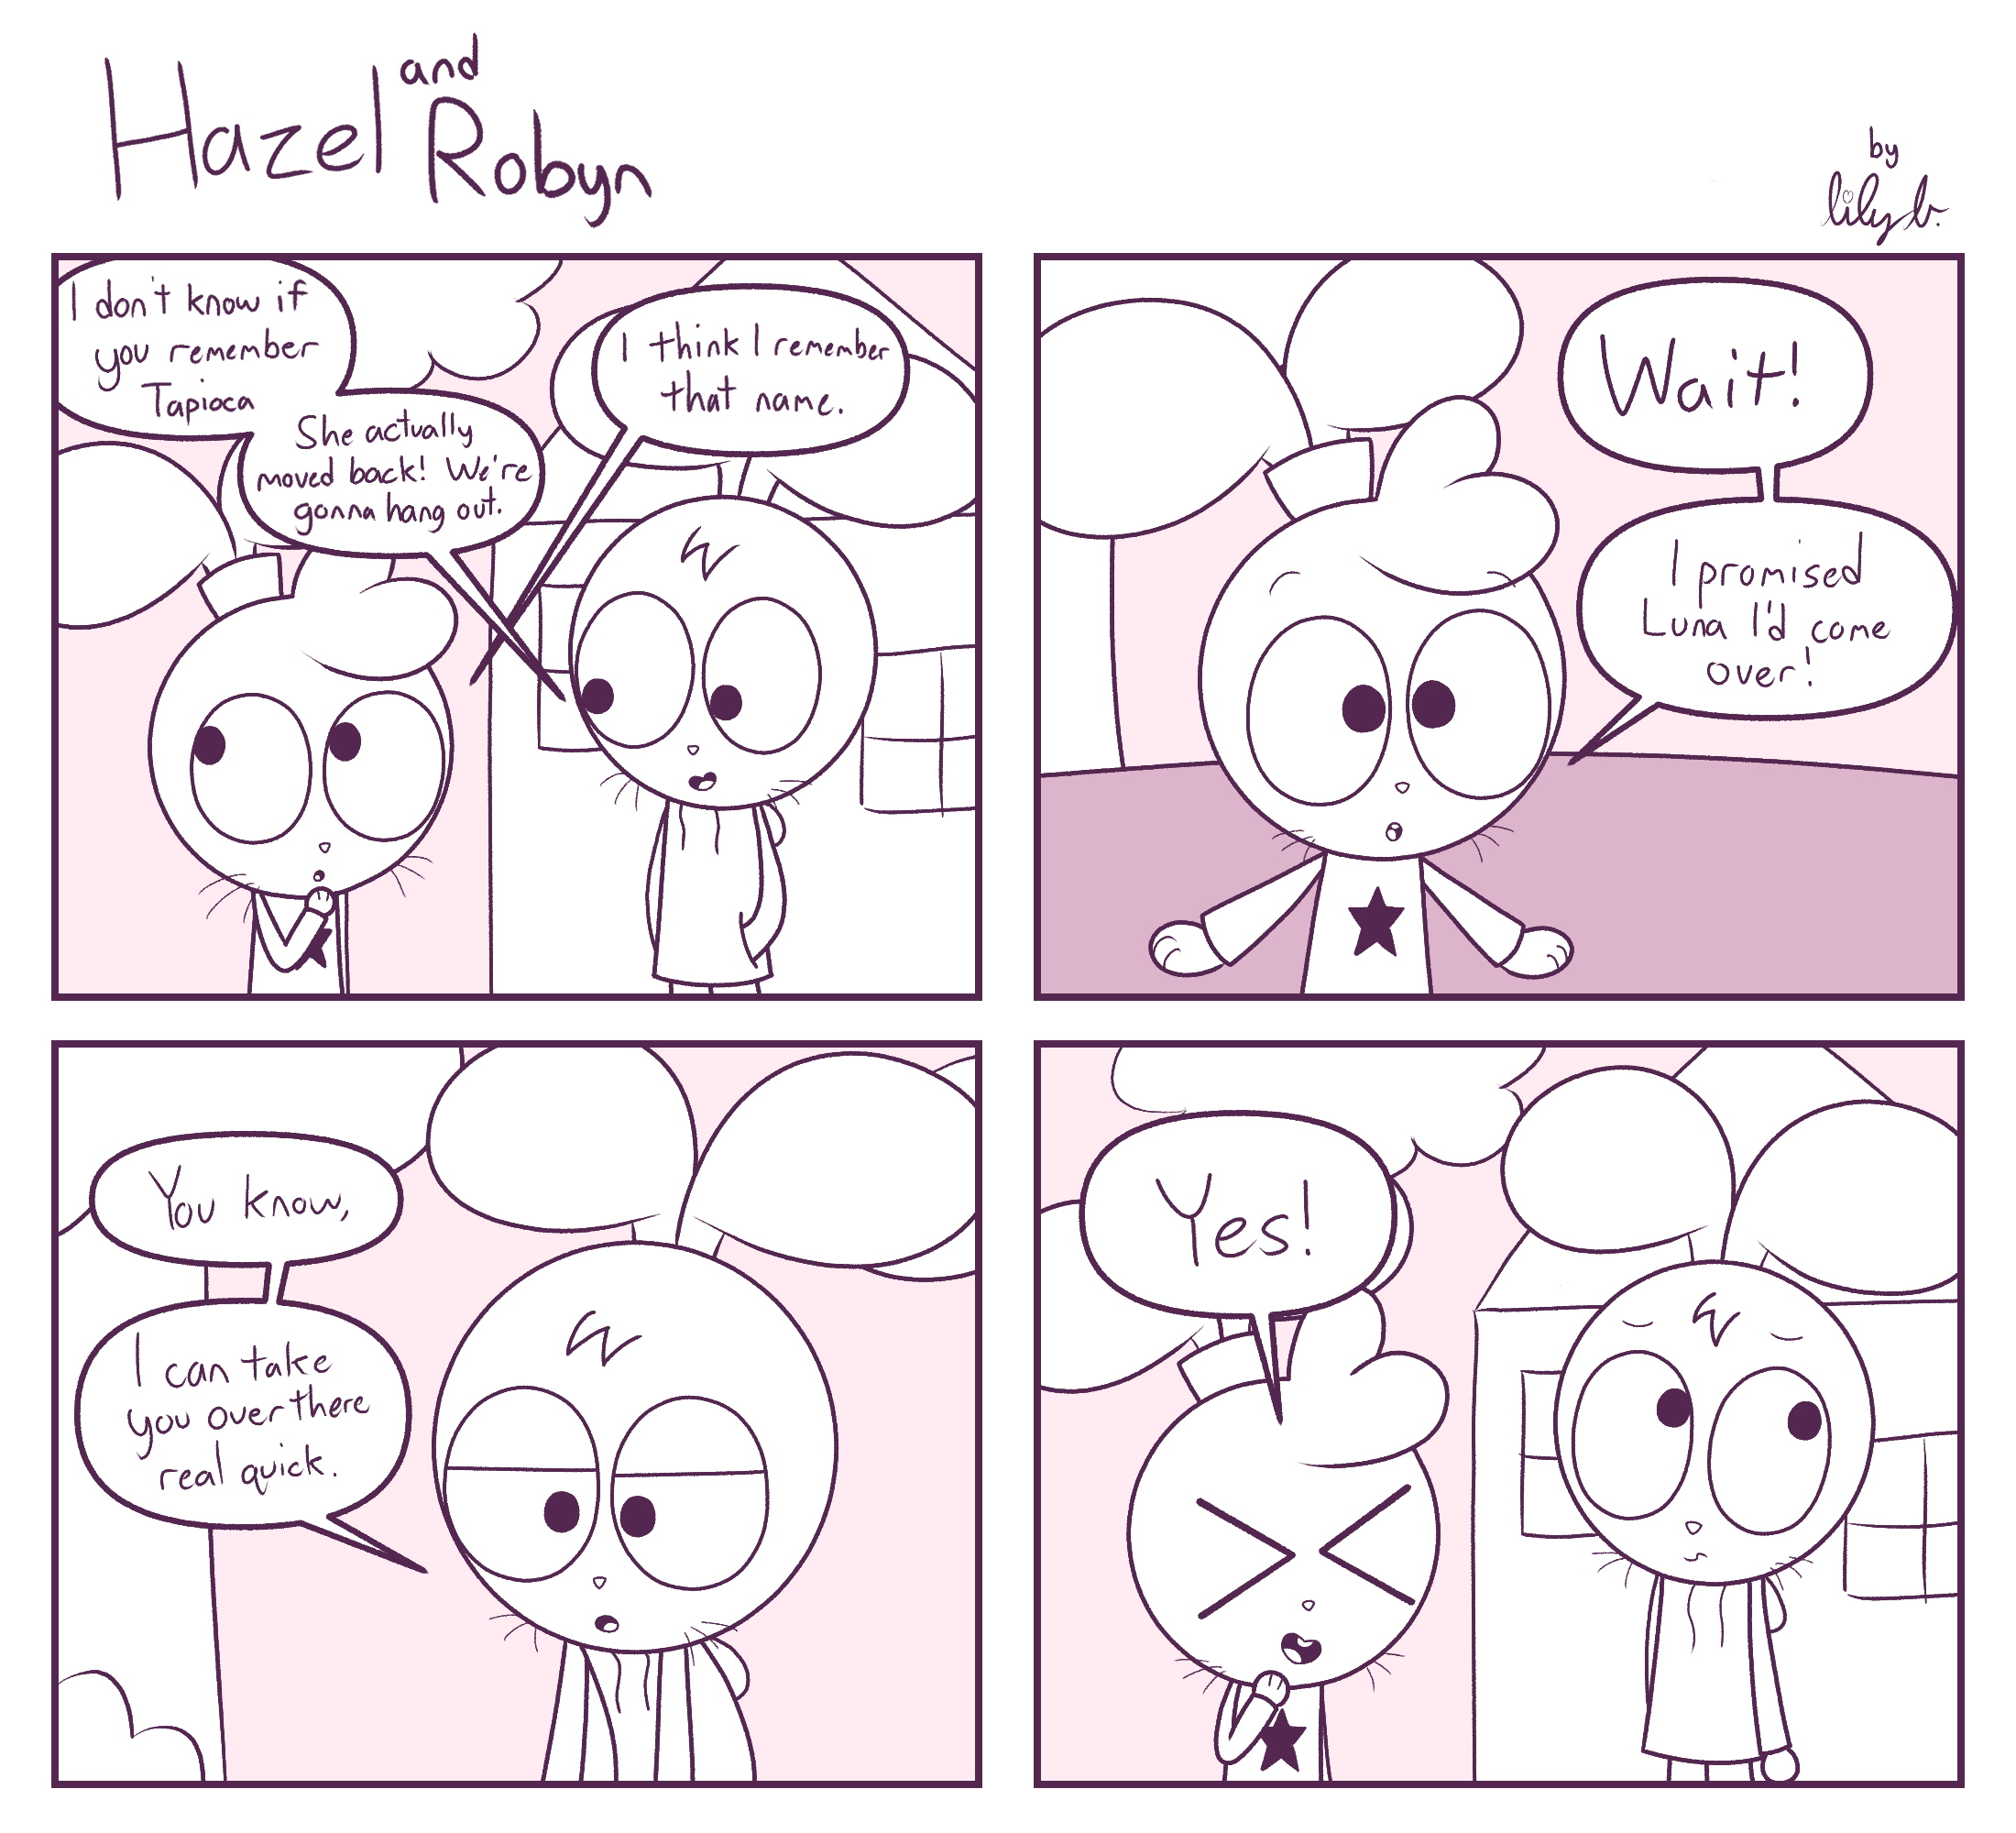 Panel 1: Hazel: I don't know if you remember Tapioca, she actually moved back! We're gonna hang out / Robyn: I think i remember that name. | Panel 2: Robyn: Wait! I promised Luna I'd come over! | Panel 3: Hazel: You know, I can take you over there real quick. | Panel 4: Robyn: Yes!